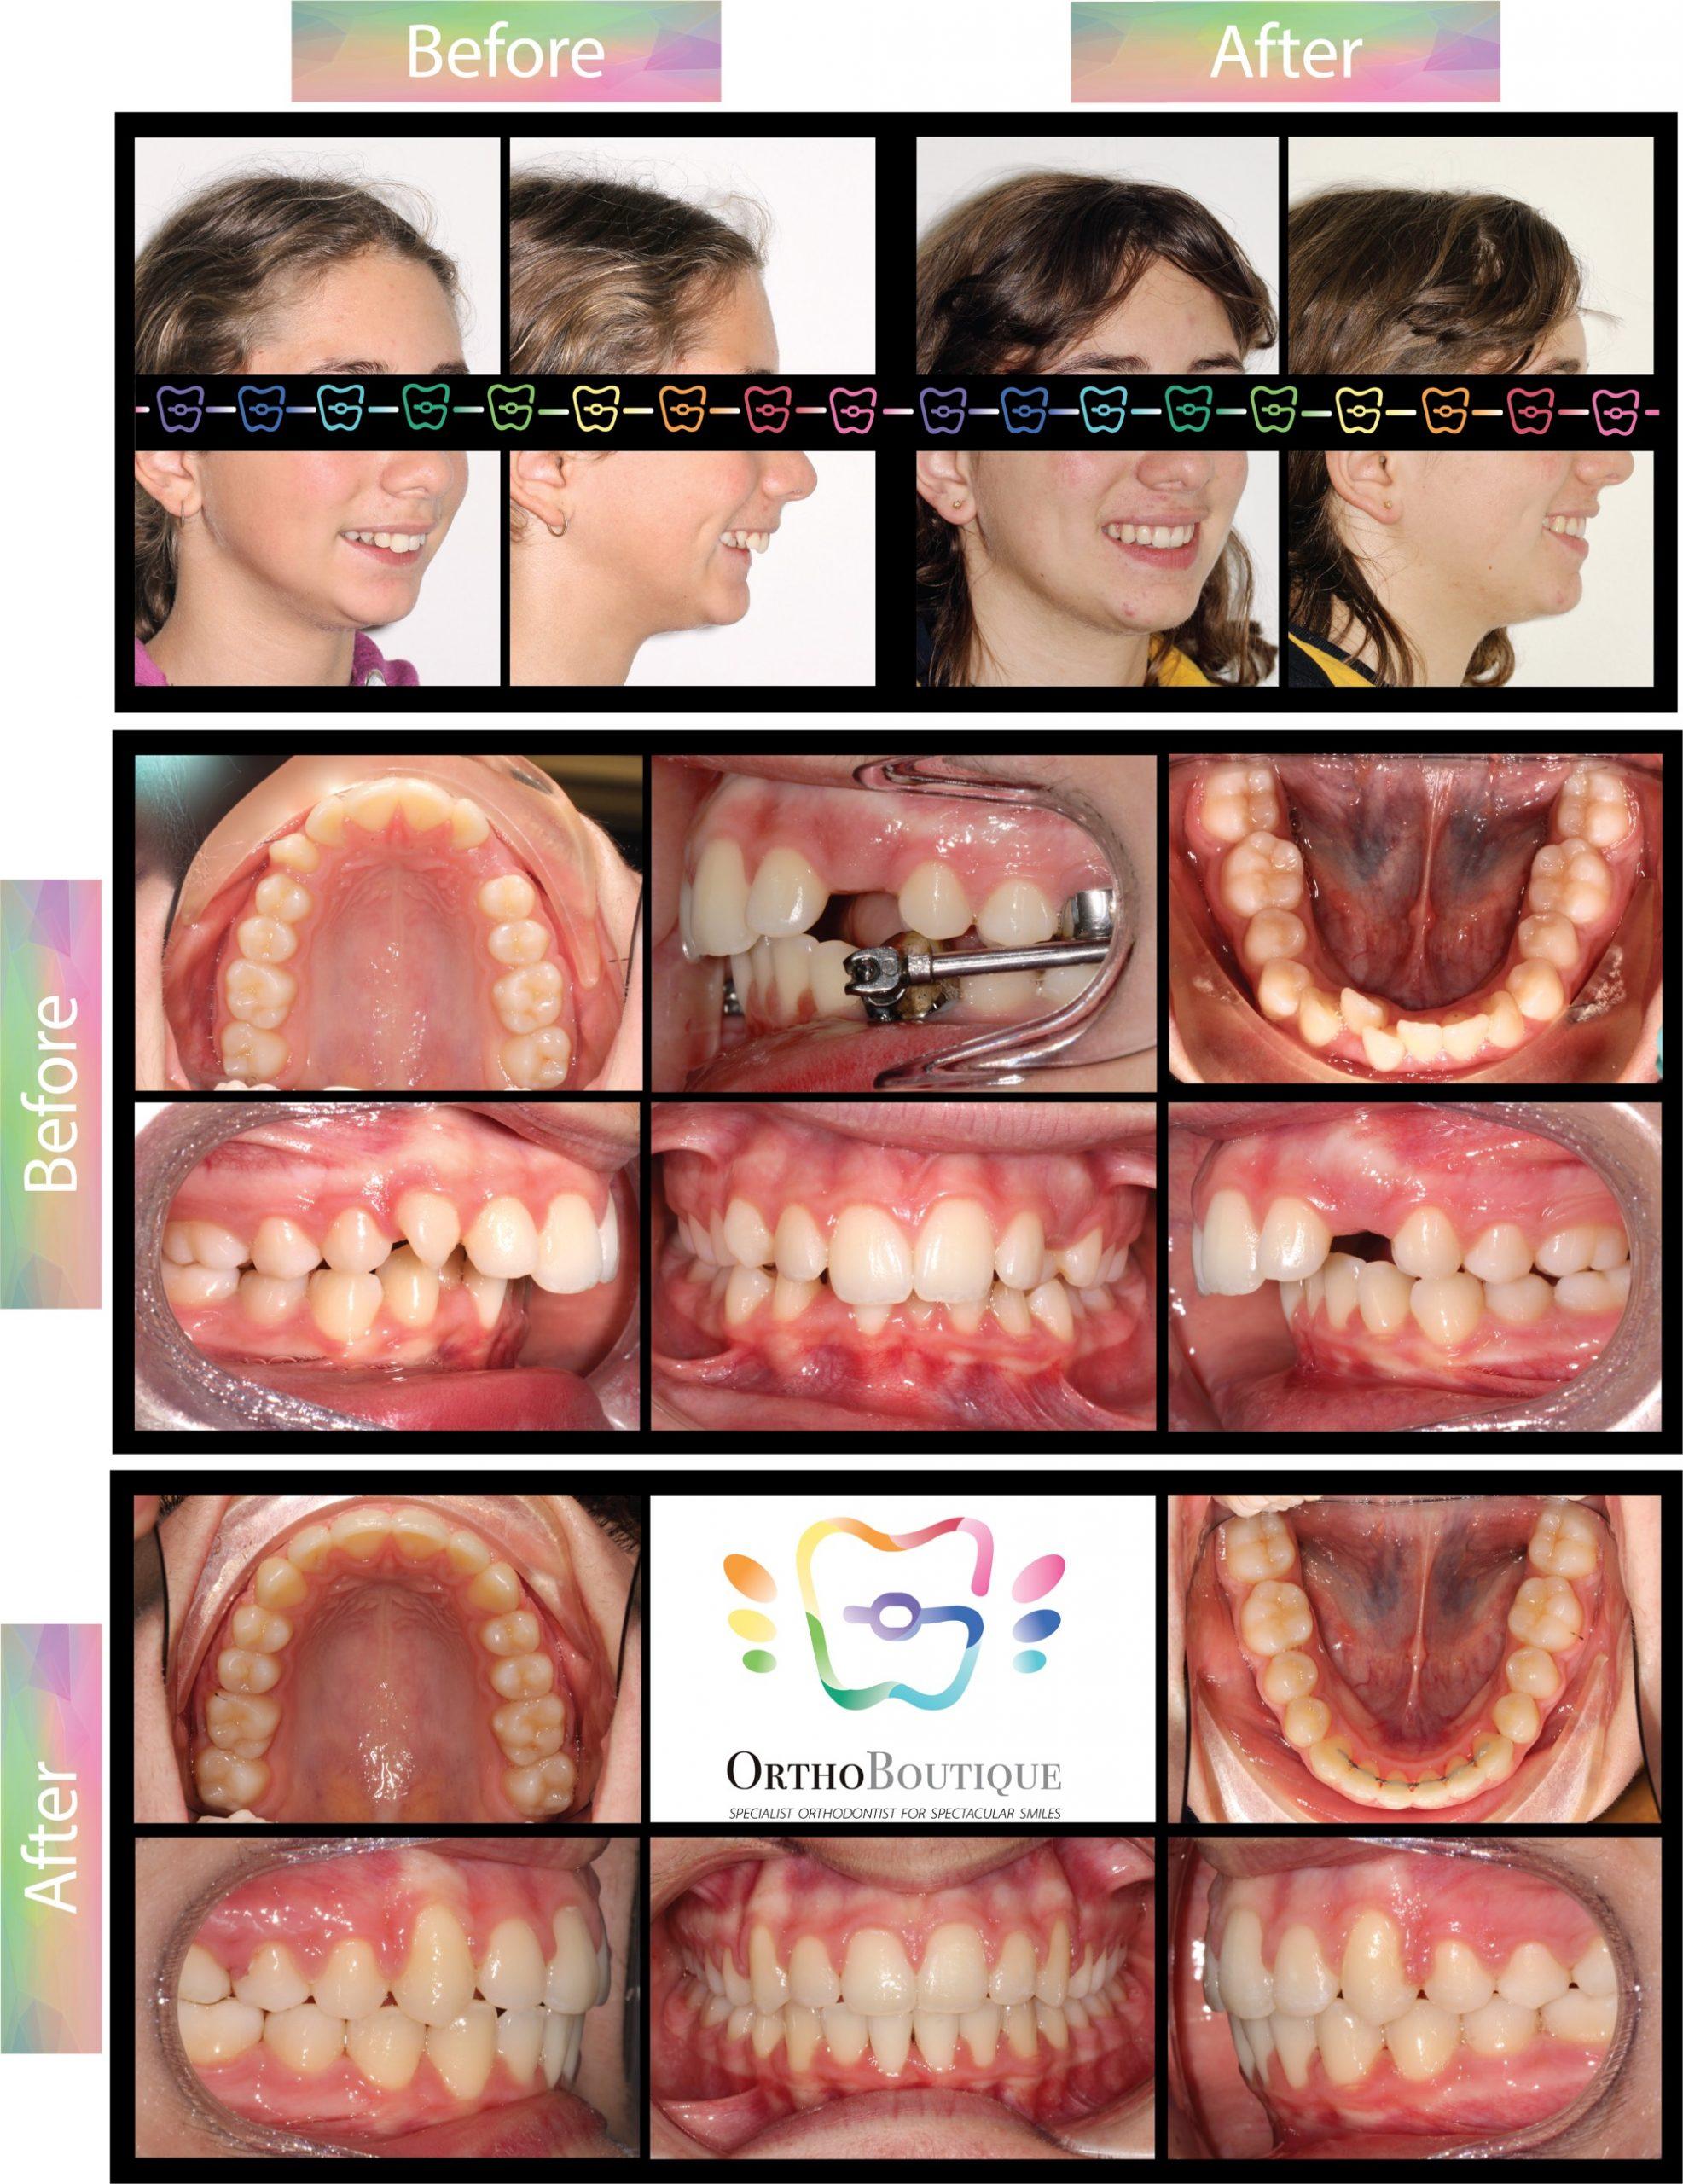 OrthoBoutique - CASE #14 Class II bite relationship, increased overjet, retrusive lower jaw position Before and after